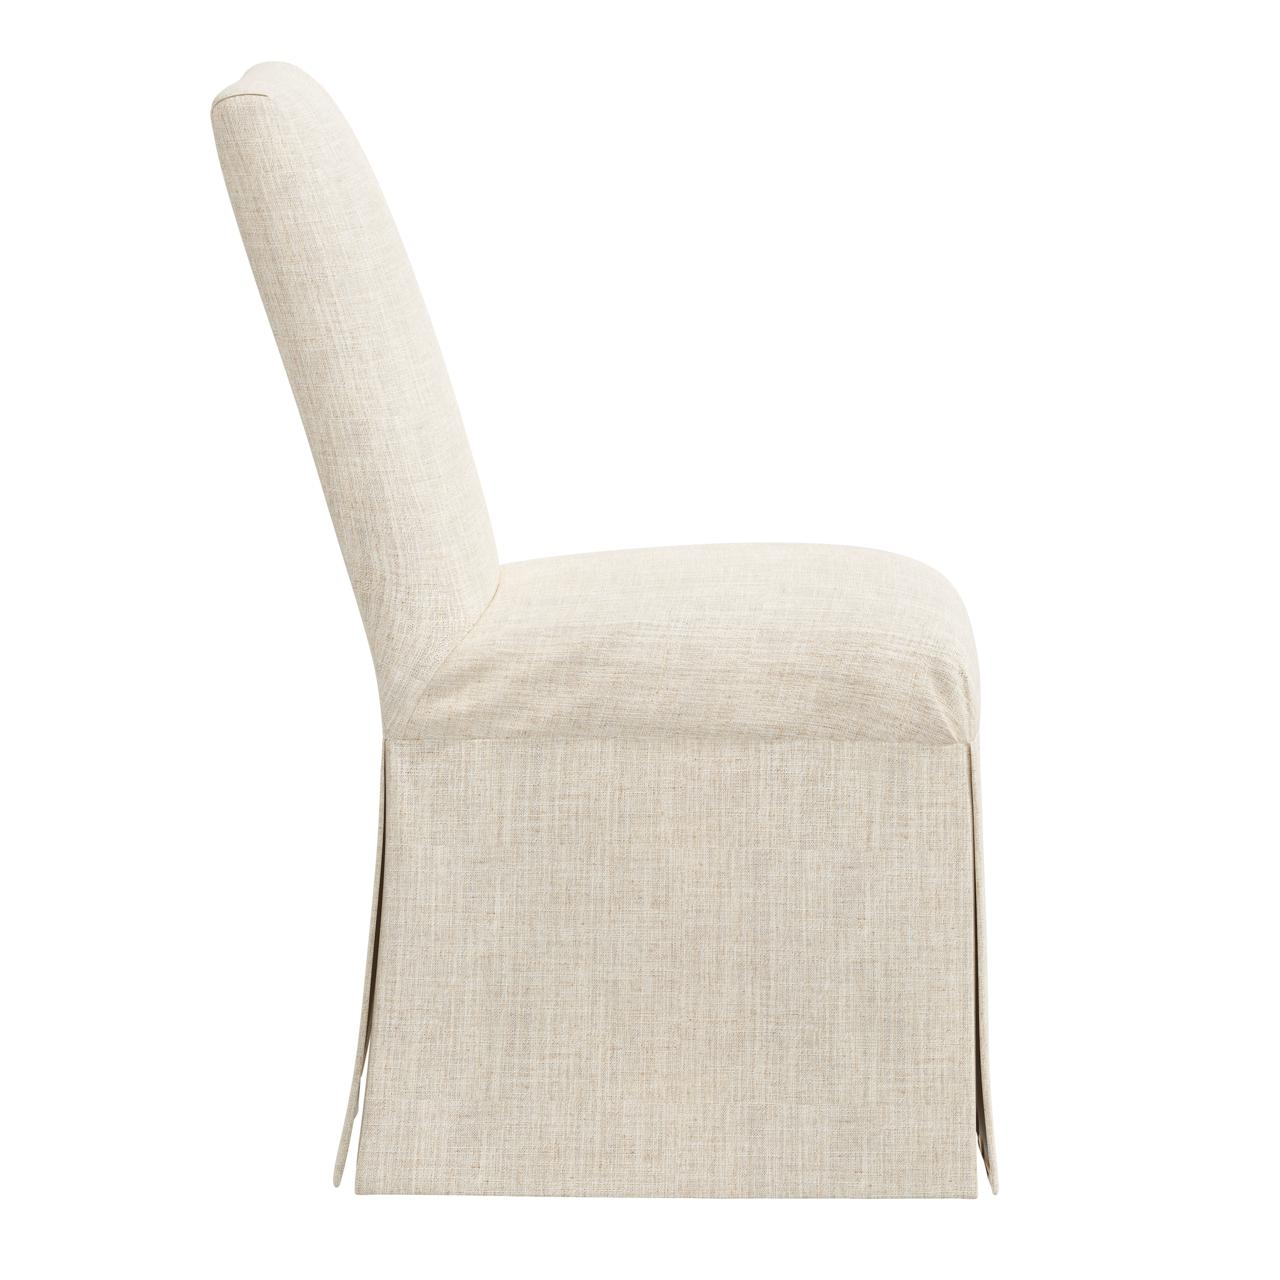 Magnolia Slipcover Dining Chair, Talc - Image 2